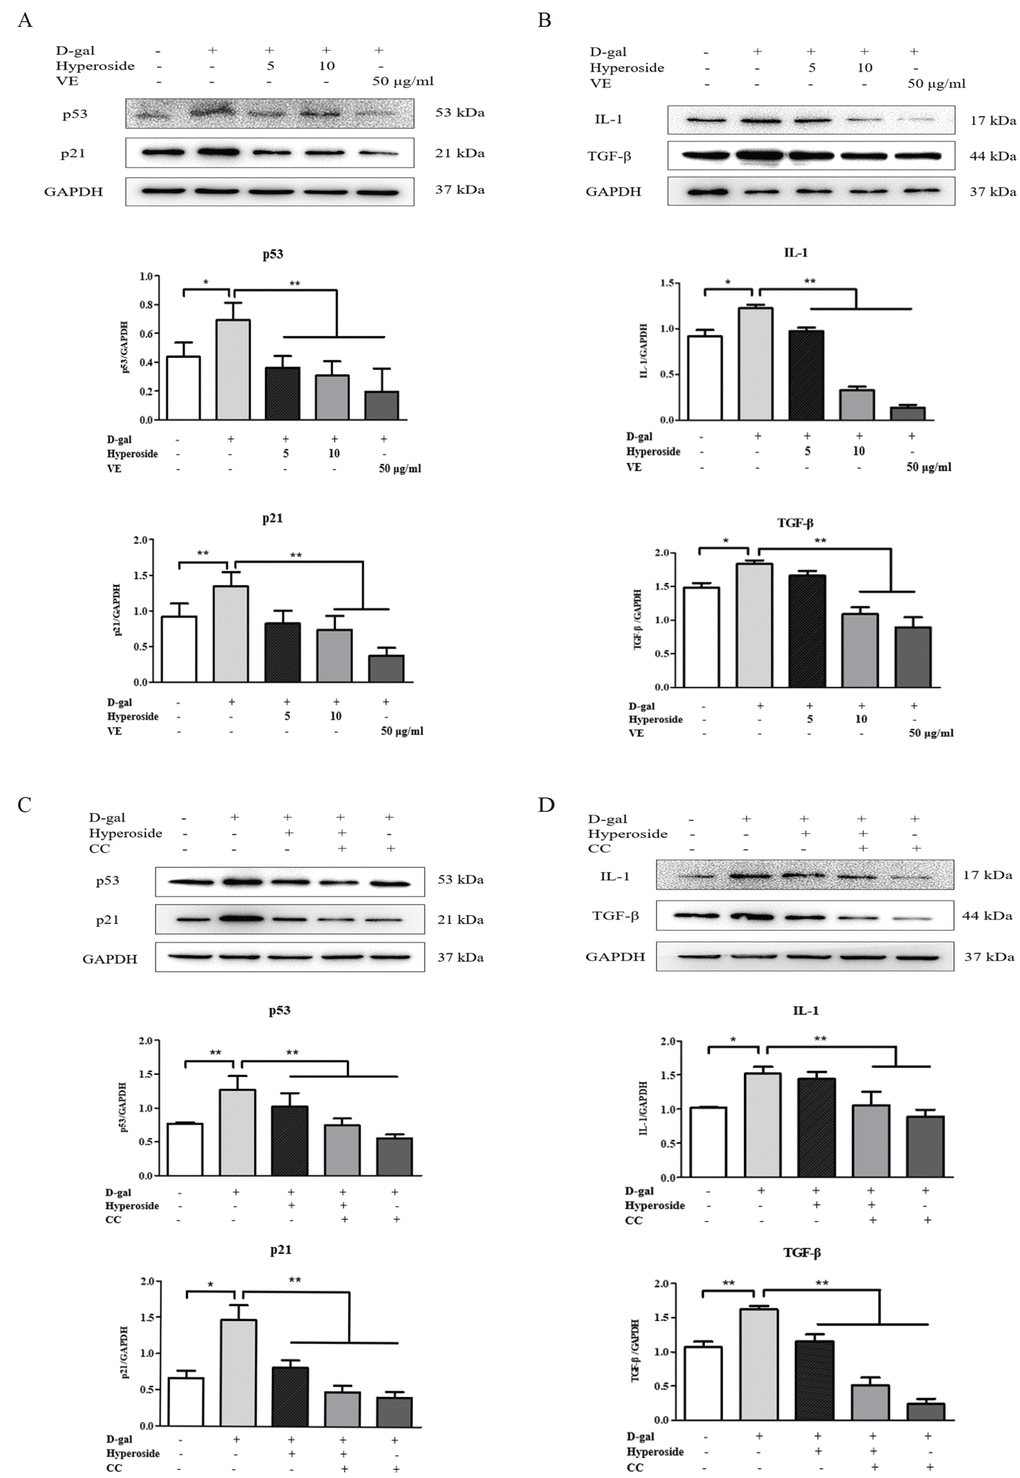 The actions of hyperoside, vitamin E and compound C on renal cellular agingand injury in vitro. (A, B) The NRK-52E cells were exposed to D-gal at 100 mM, with the treatment of hyperoside at 0, 5, and 10 μg/ml and VE at 50 μg/ml for 24 hours, and subjected to a WB analysis for p53, p21, IL-1 and TGF-β, respectively. (C, D) The NRK-52E cells were exposed to D-gal, with the treatment of hyperoside and CC for 24 hours, and subjected to a WB analysis for p53, p21, IL-1 and TGF-β, respectively. The data are expressed as the mean ± SD, (n=3), *P **P 